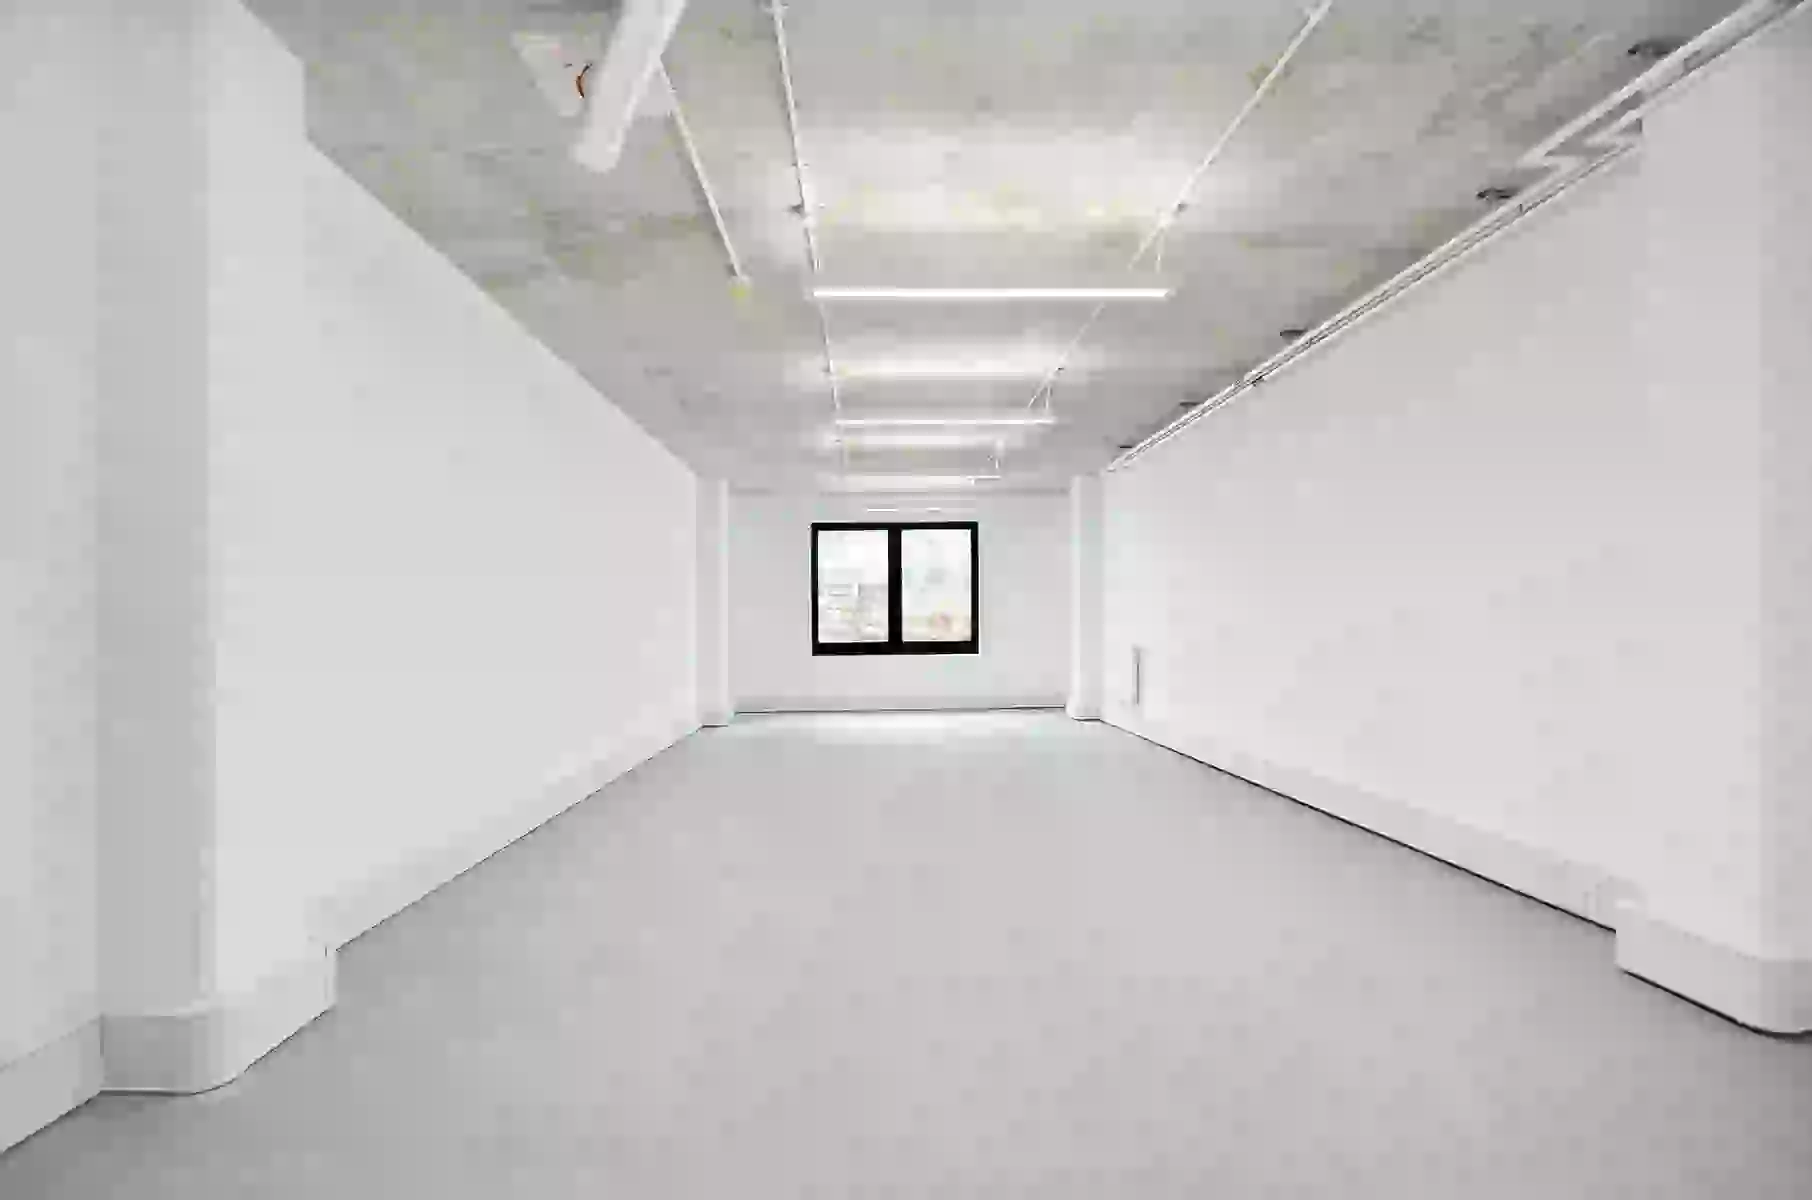 Office space to rent at ScreenWorks, 22 Highbury Grove, Islington, London, unit SW.G12, 560 sq ft (52 sq m).